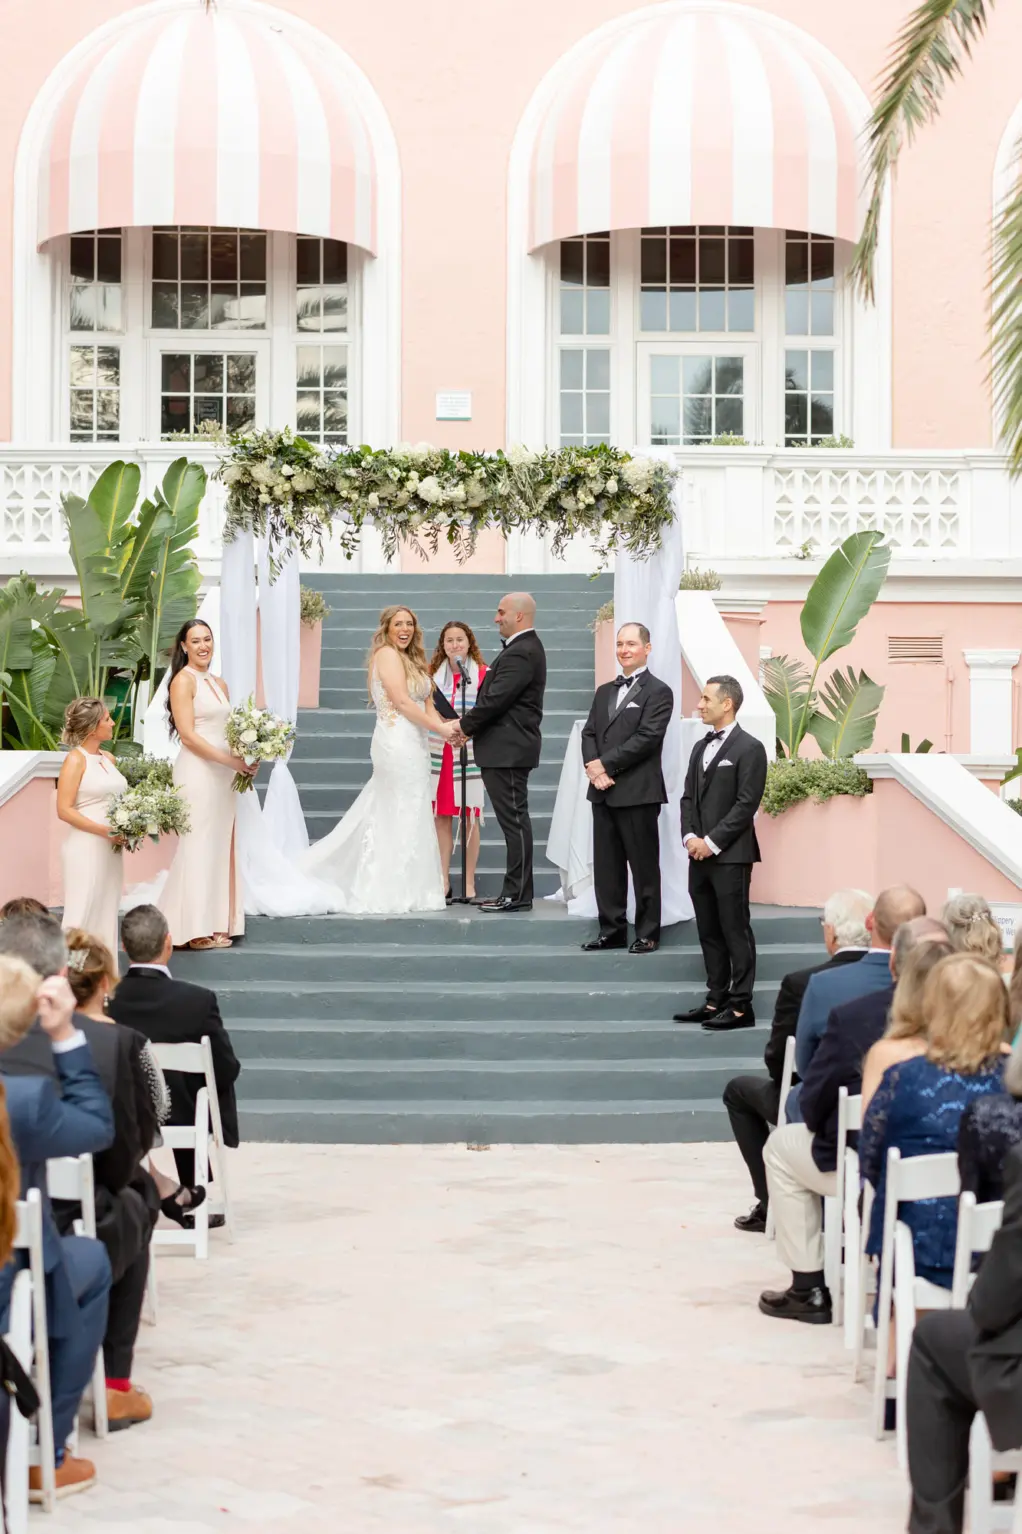 Bride and Groom Vow Exchange | Outdoor Jewish Wedding Ceremony at The Pink Palace | Tampa Bay Venue The Don CeSar